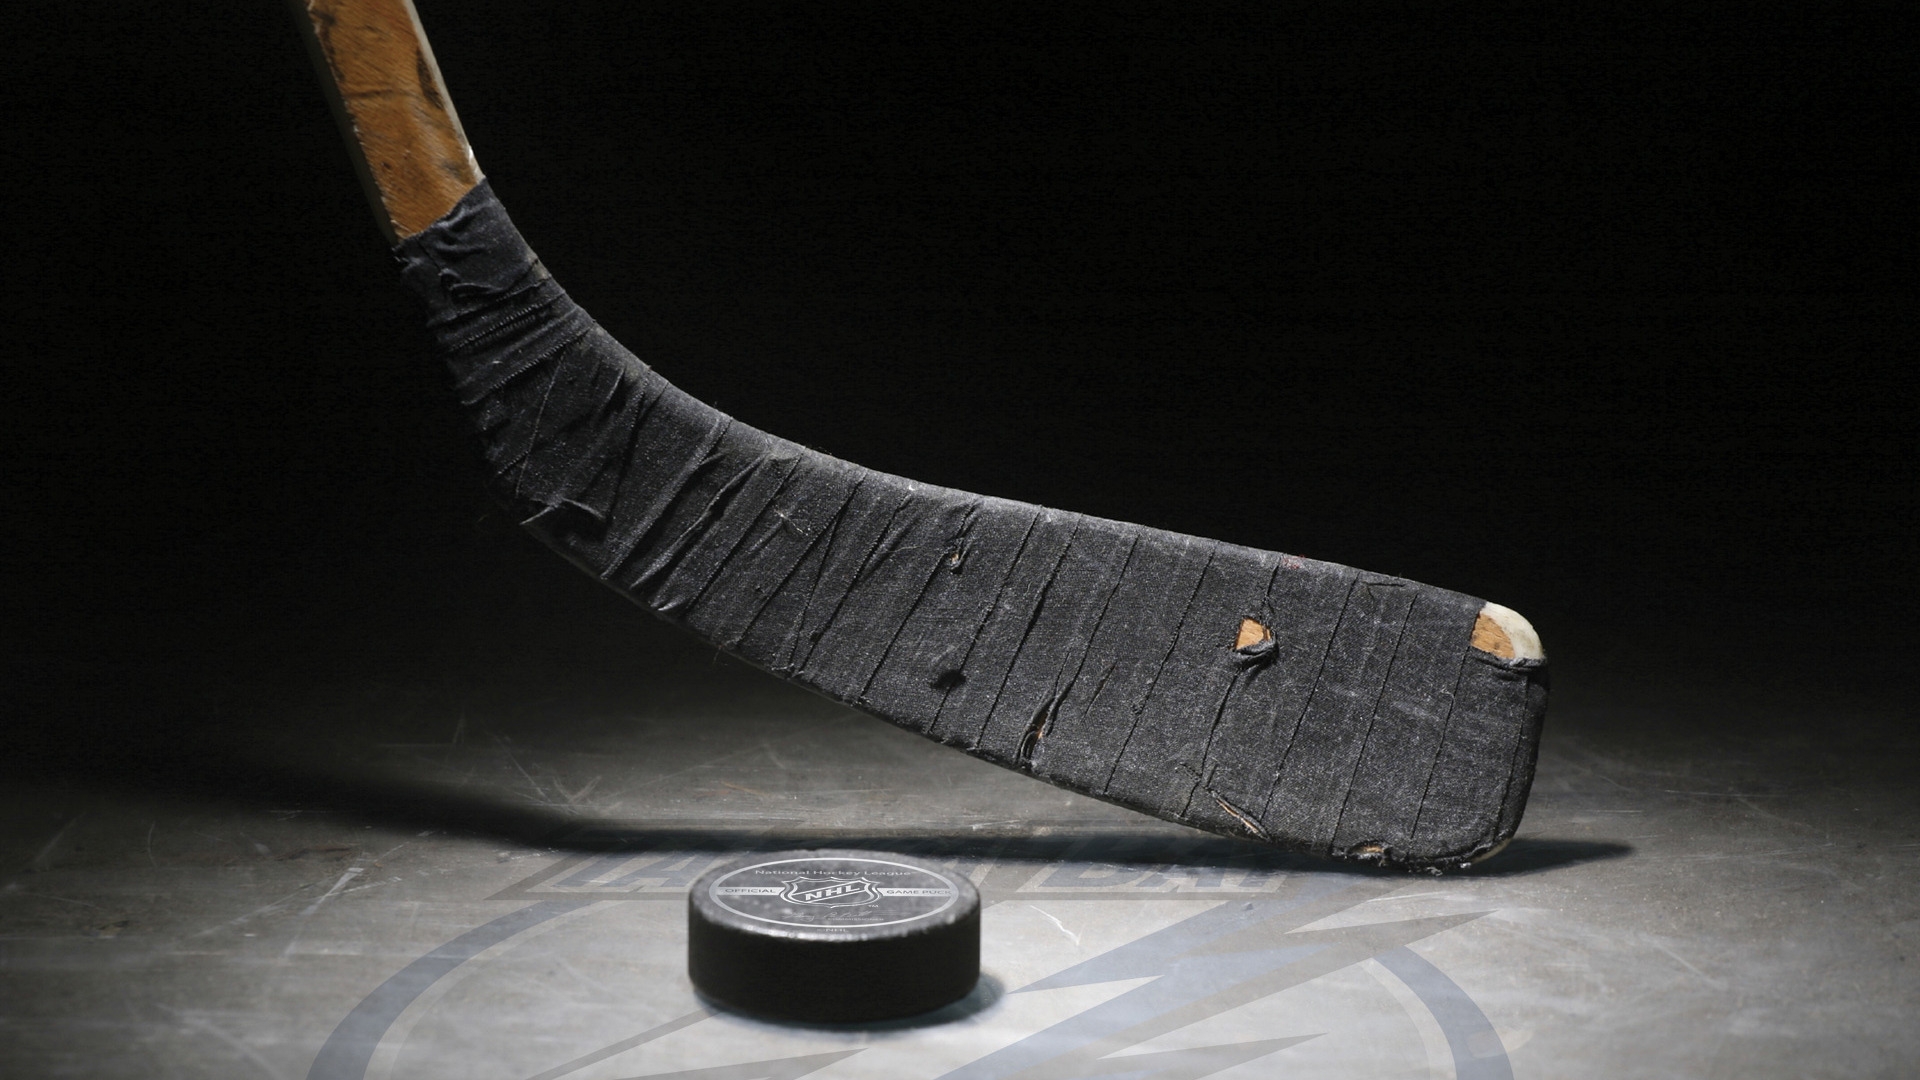 Hockey Puck for 1920 x 1080 HDTV 1080p resolution